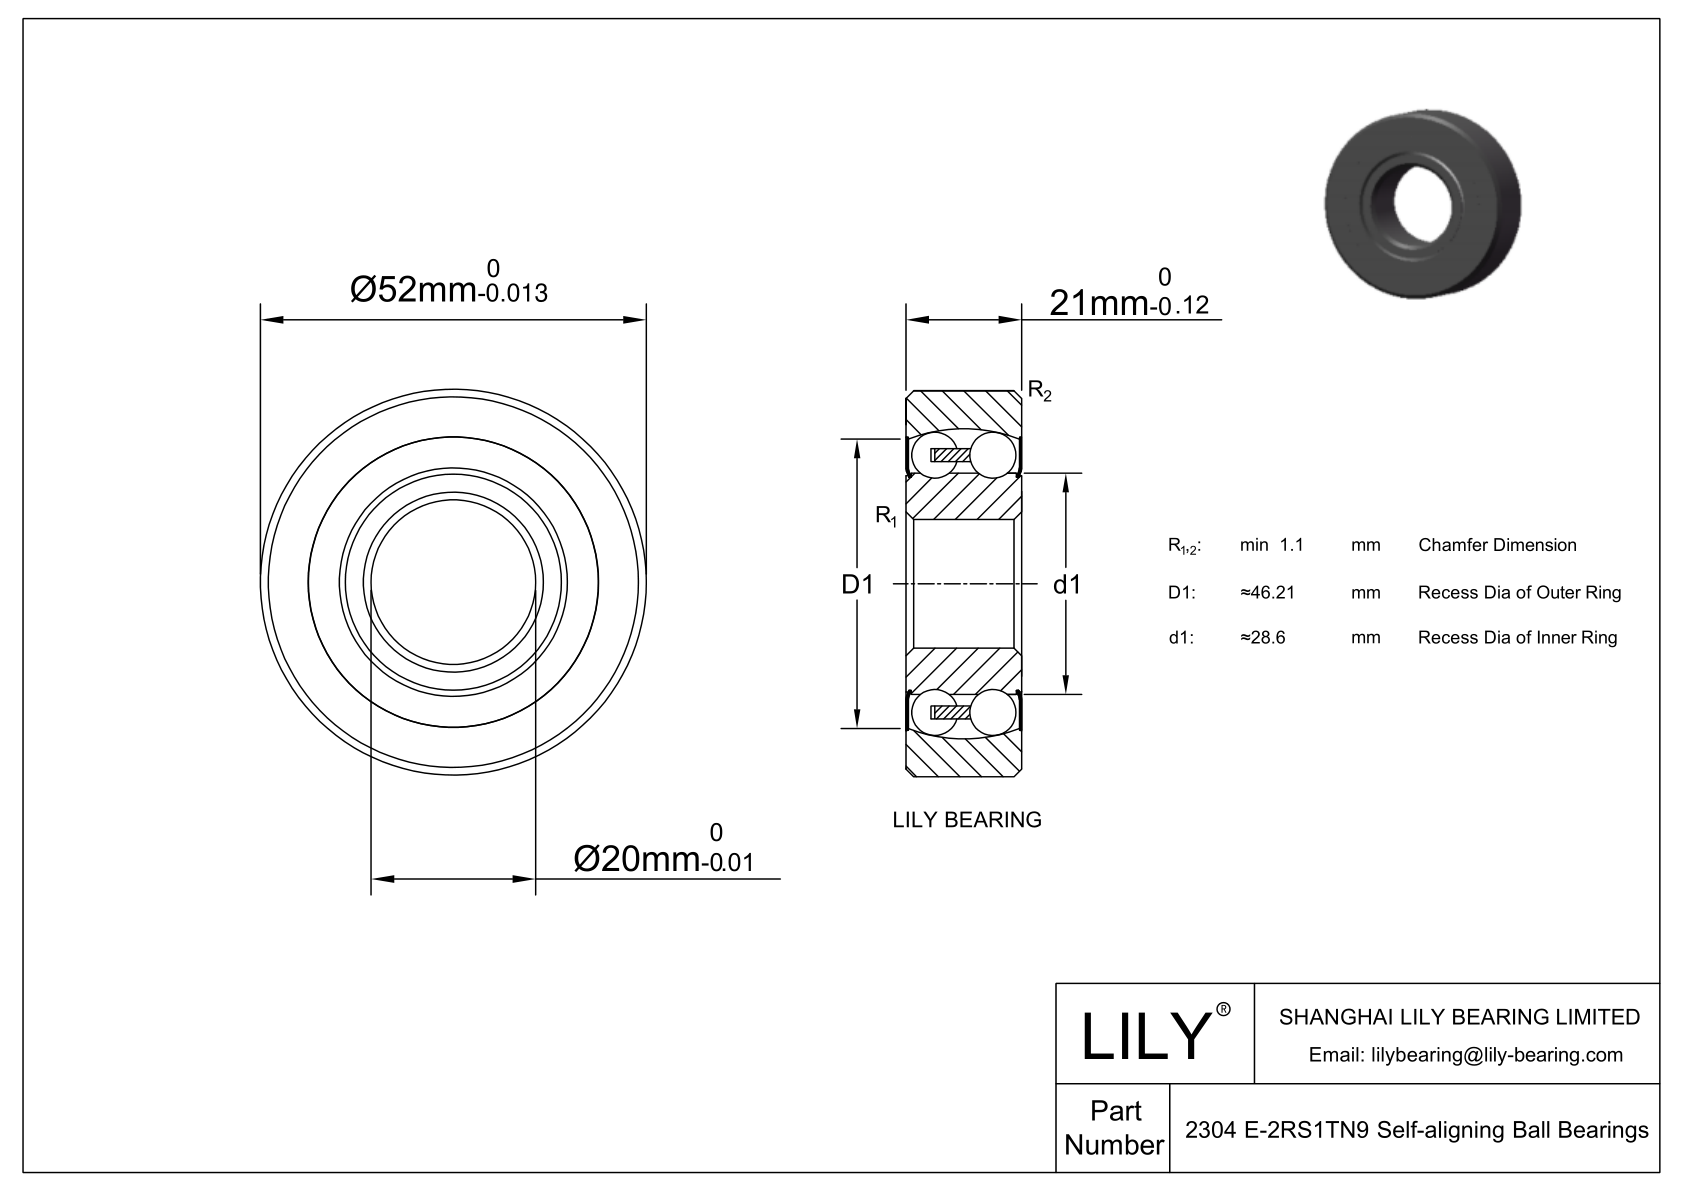 S2304 E-2RS1TN9 Stainless Steel Self Aligning Ball Bearings cad drawing